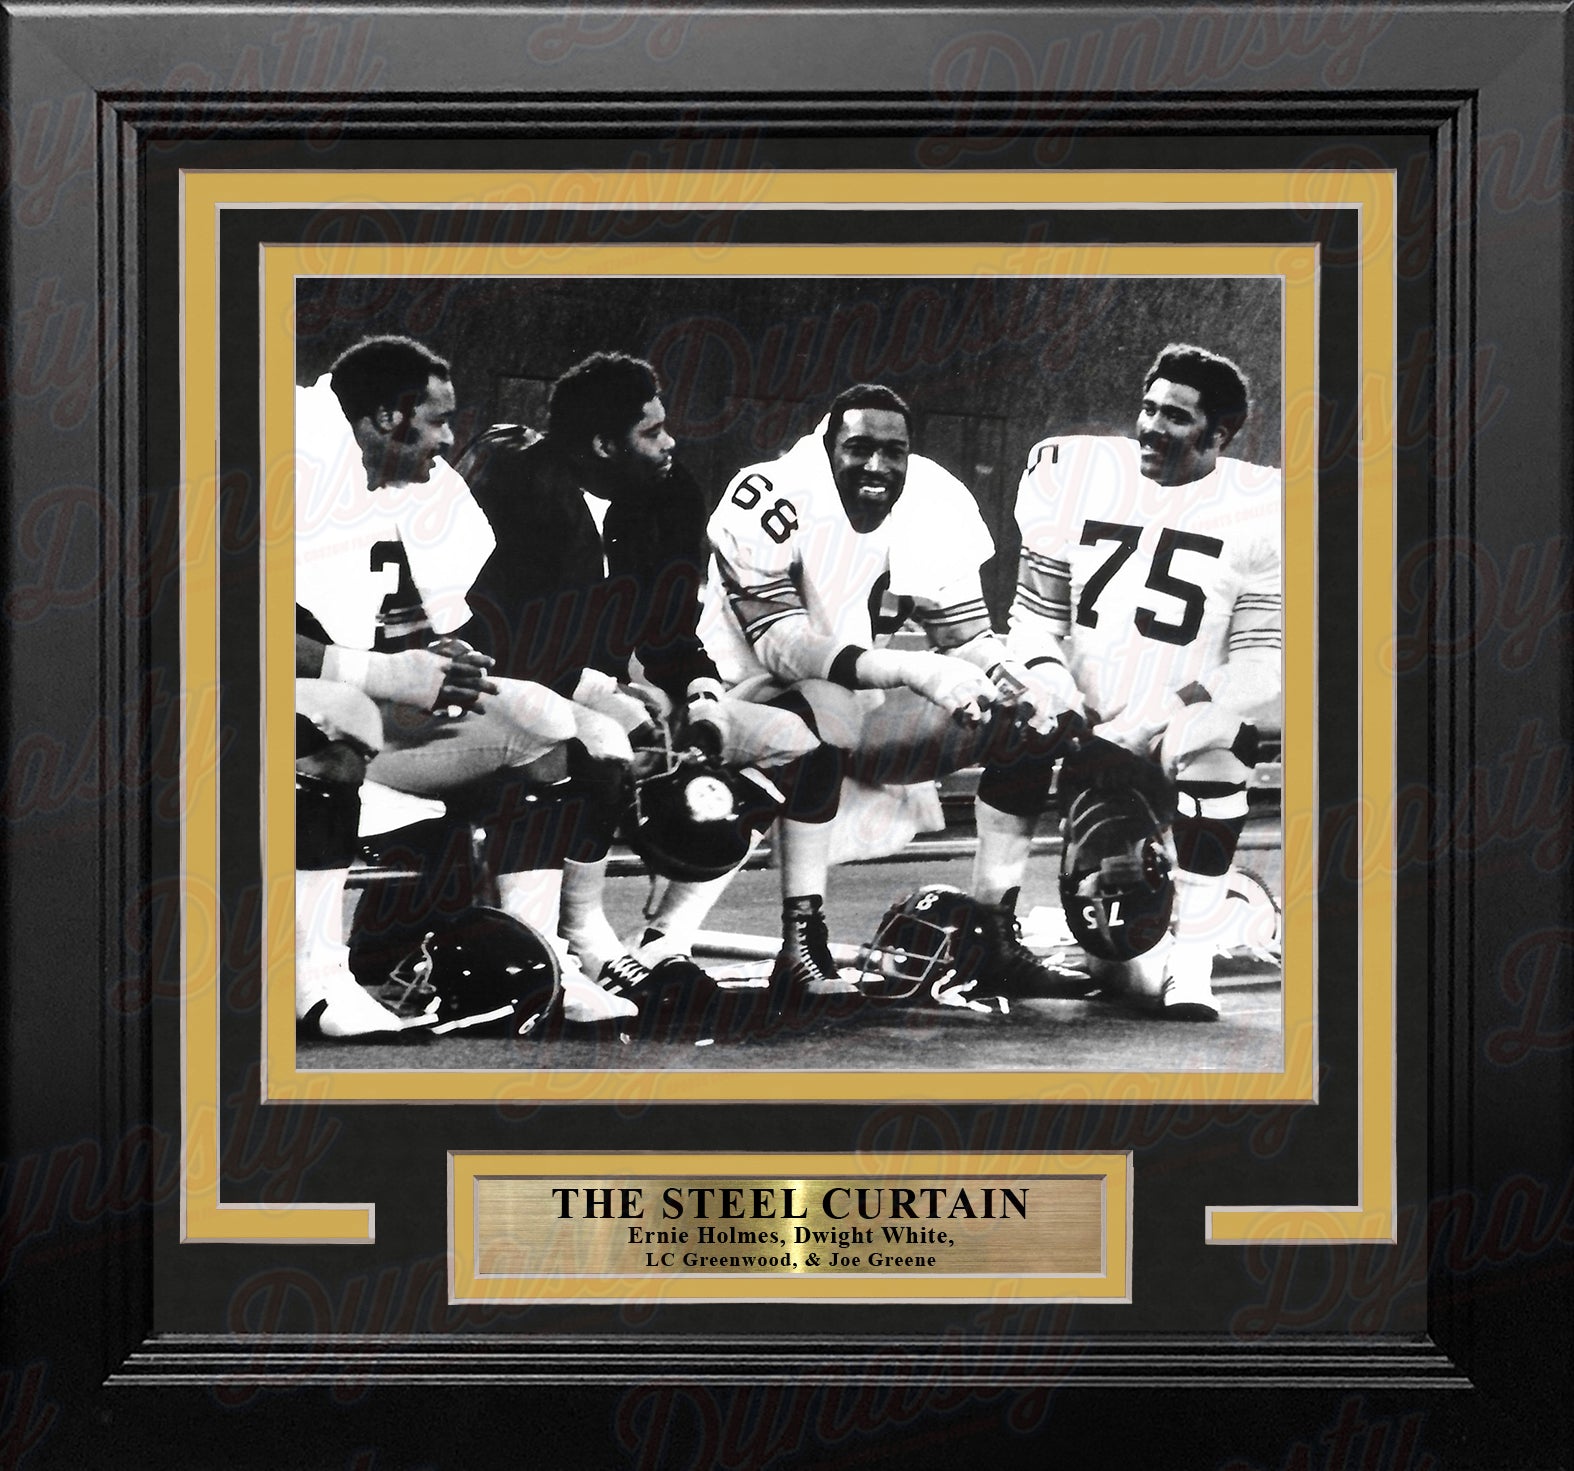 The Steel Curtain on the Bench Pittsburgh Steelers 8" x 10" Framed Football Photo - Dynasty Sports & Framing 